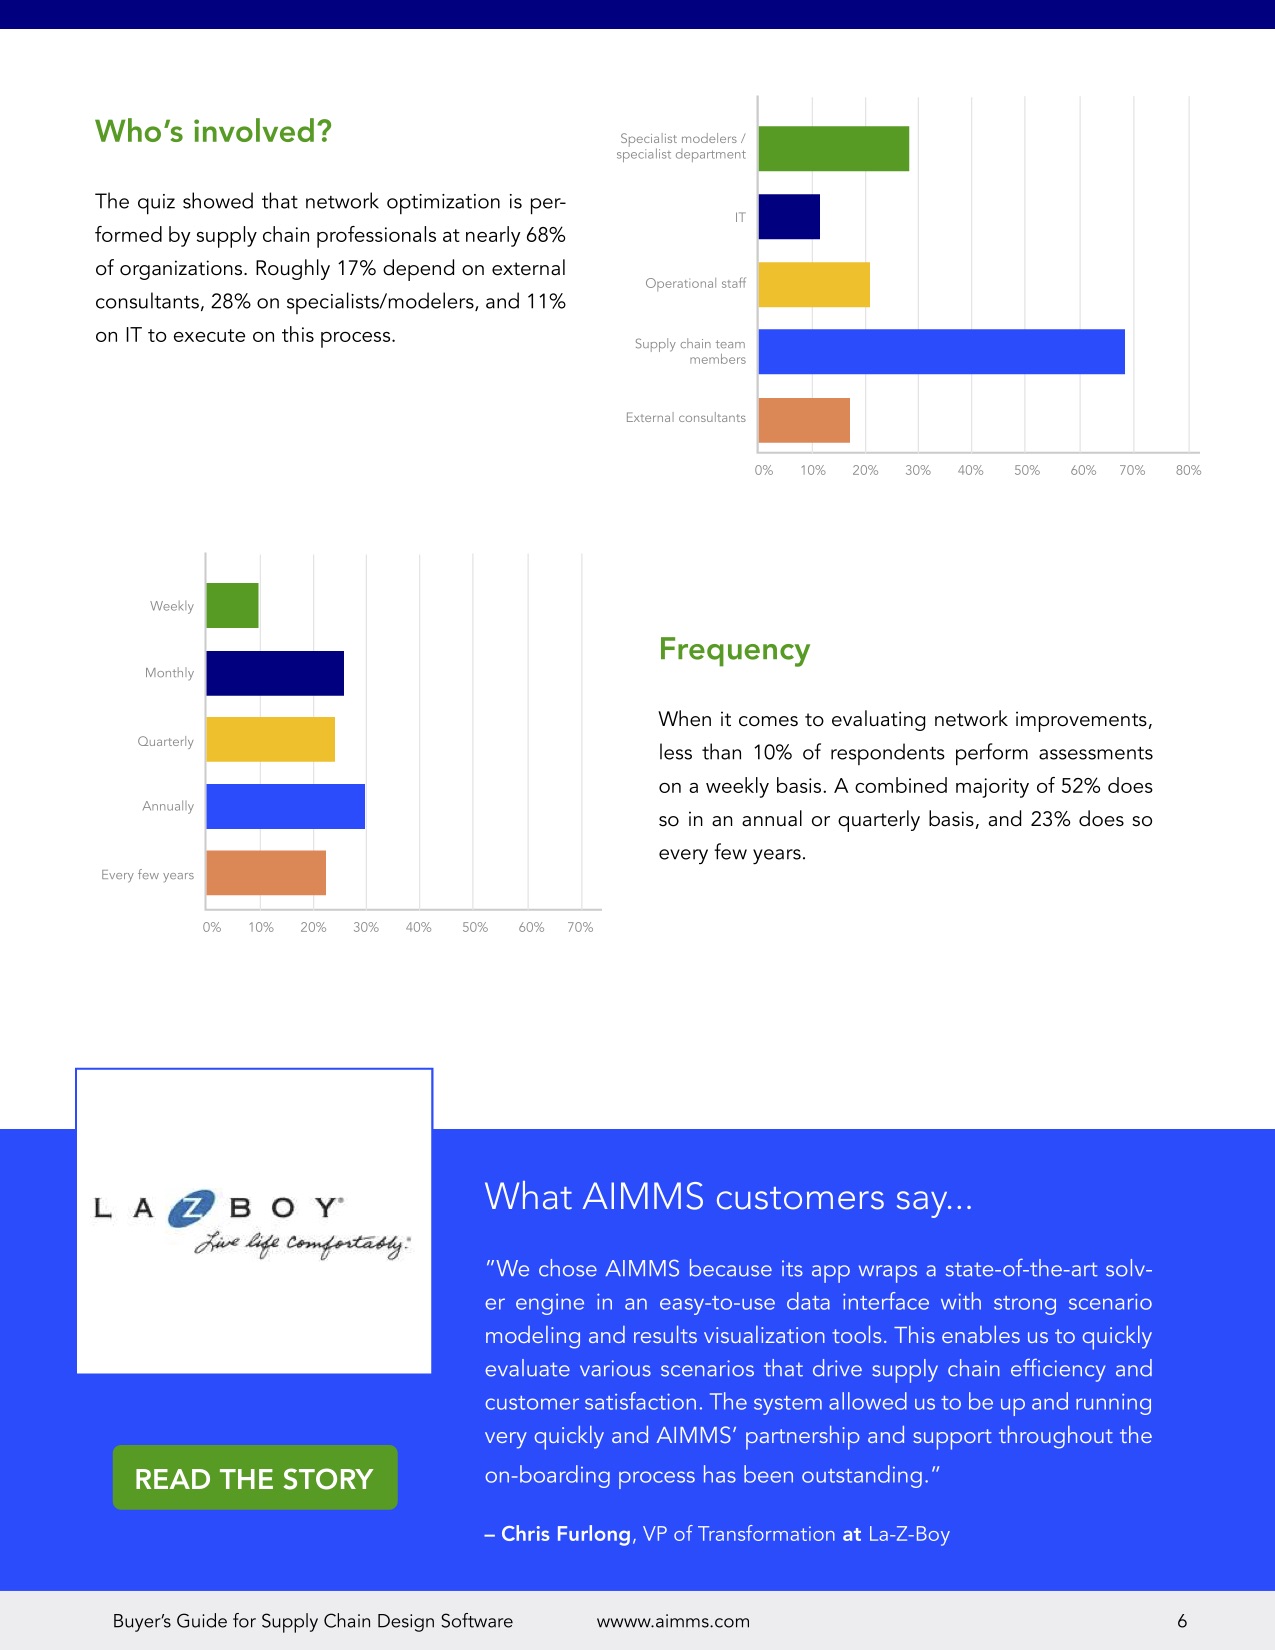 AIMMS-Buyers-Guide-Network-Design-frequency